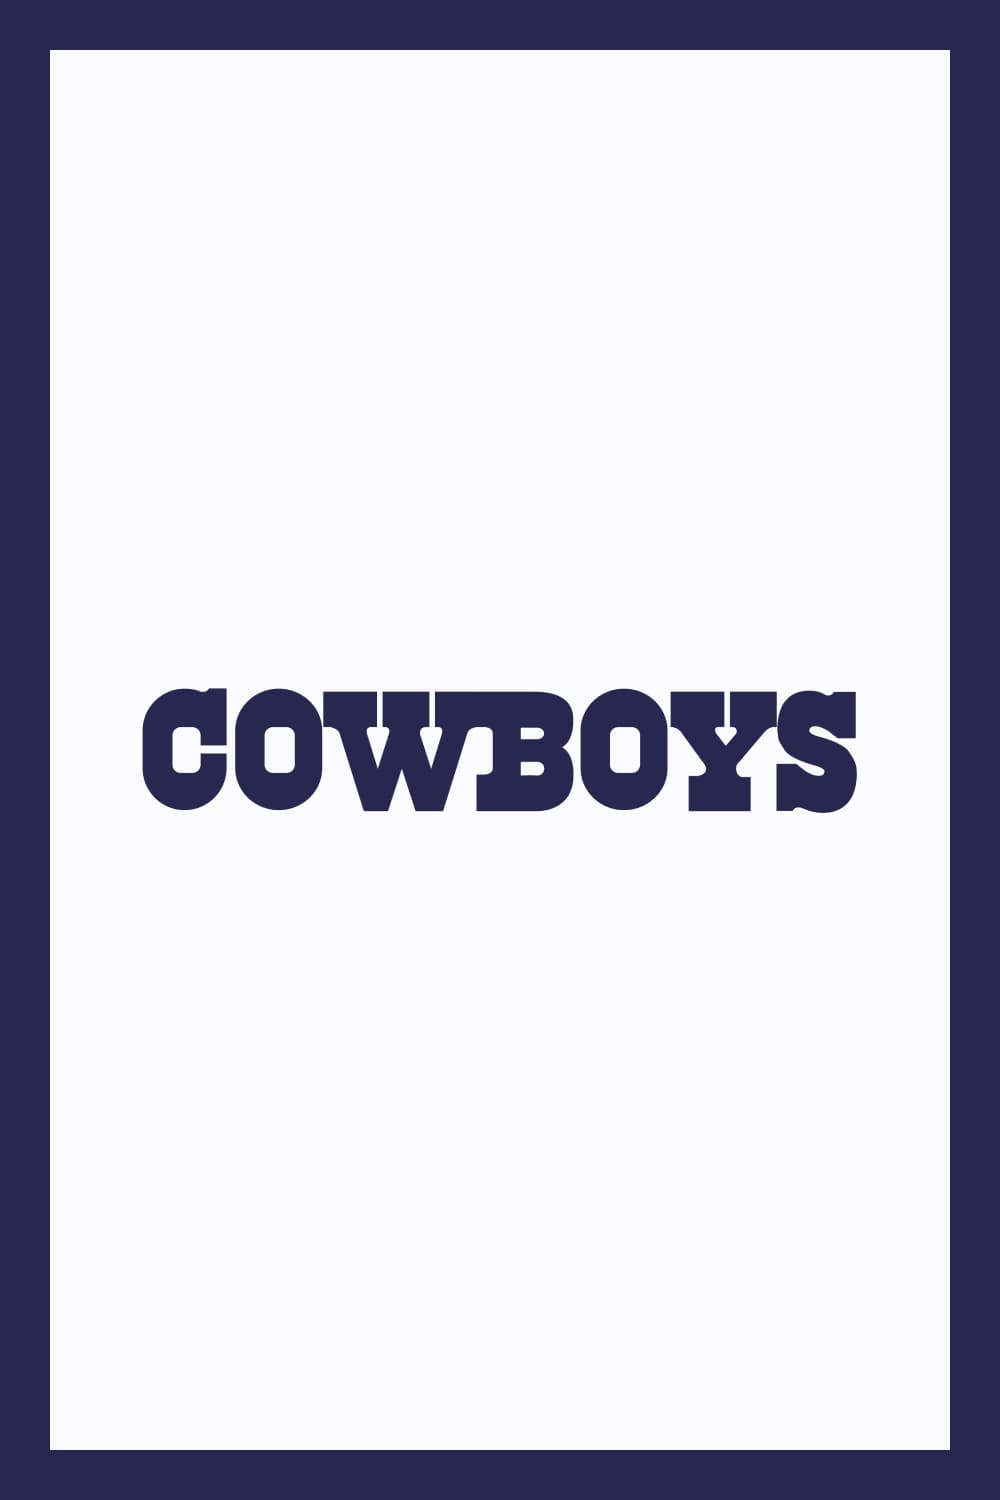 Blue text COWBOYS on white background.